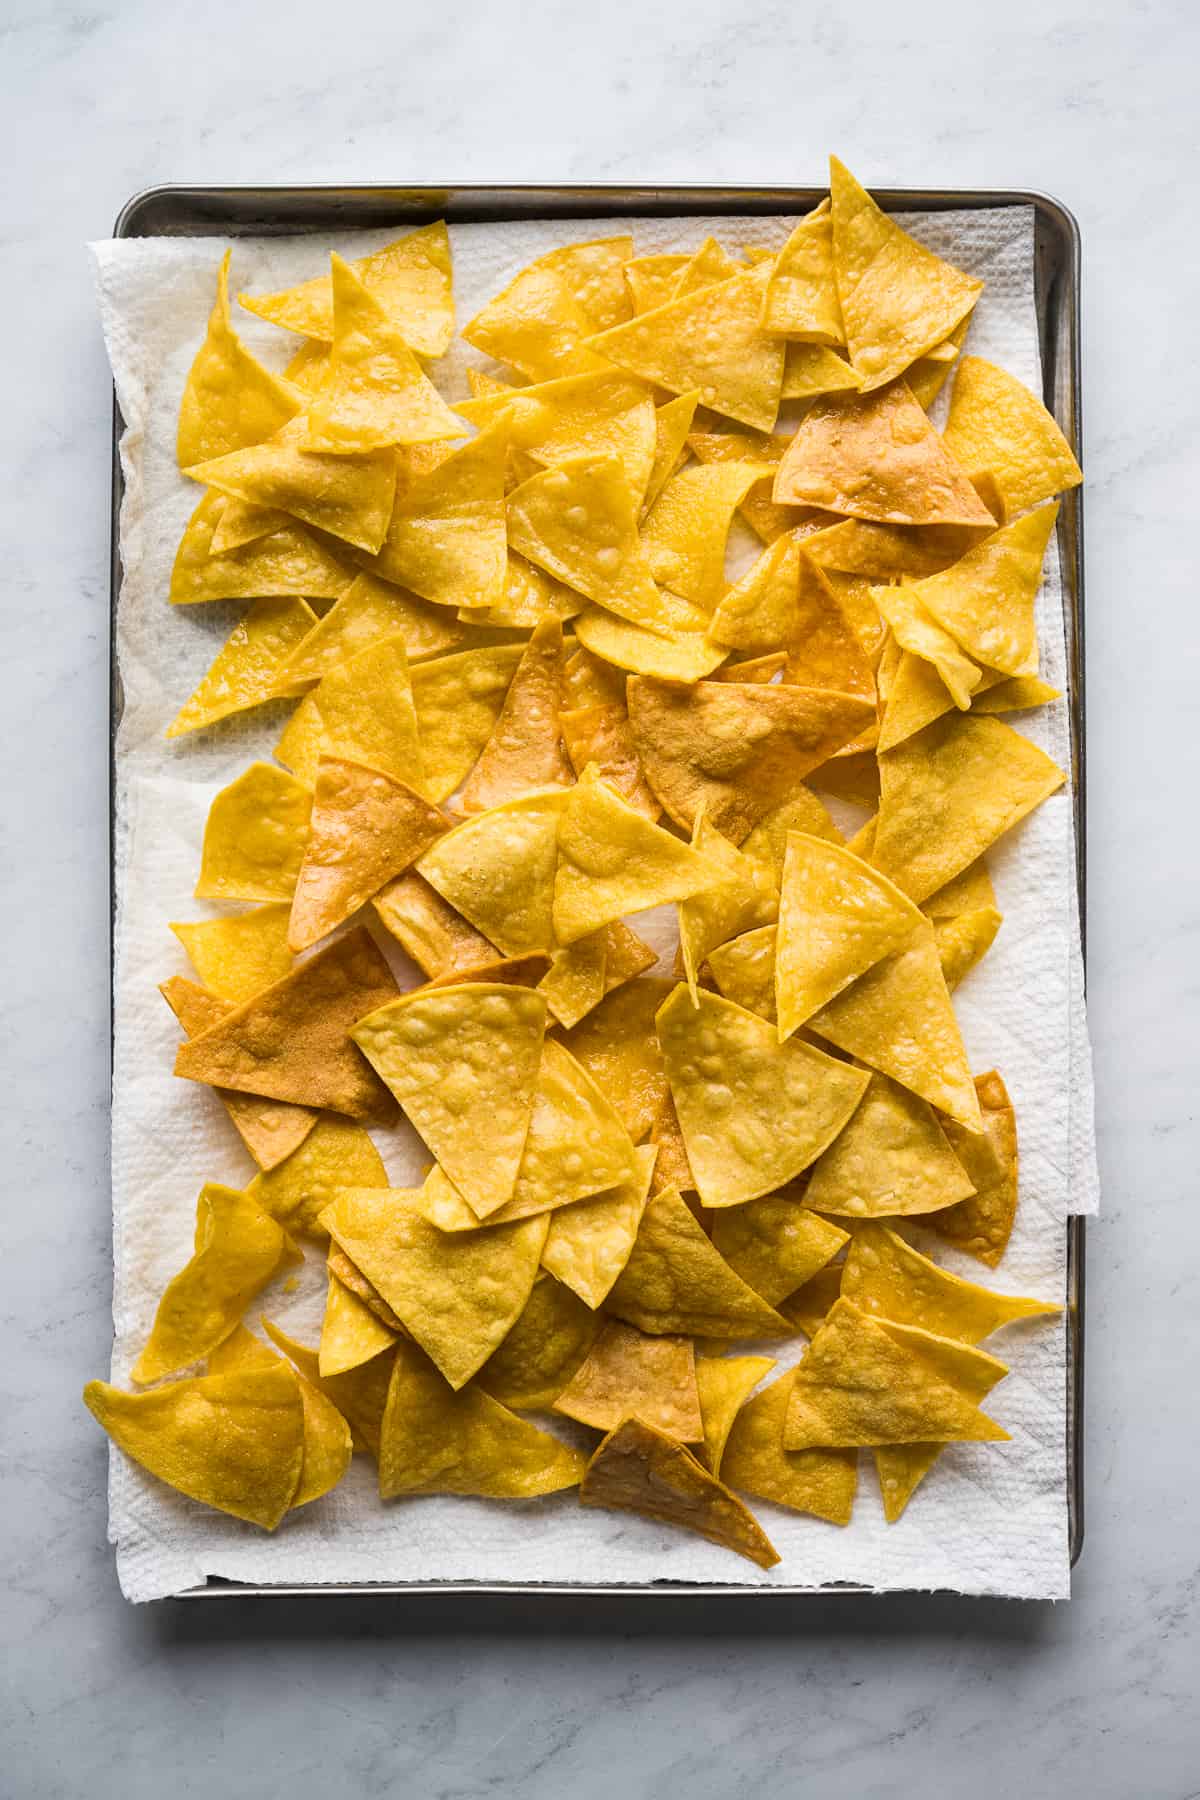 Freshly fried corn tortilla chips on a baking sheet lined with paper towels.